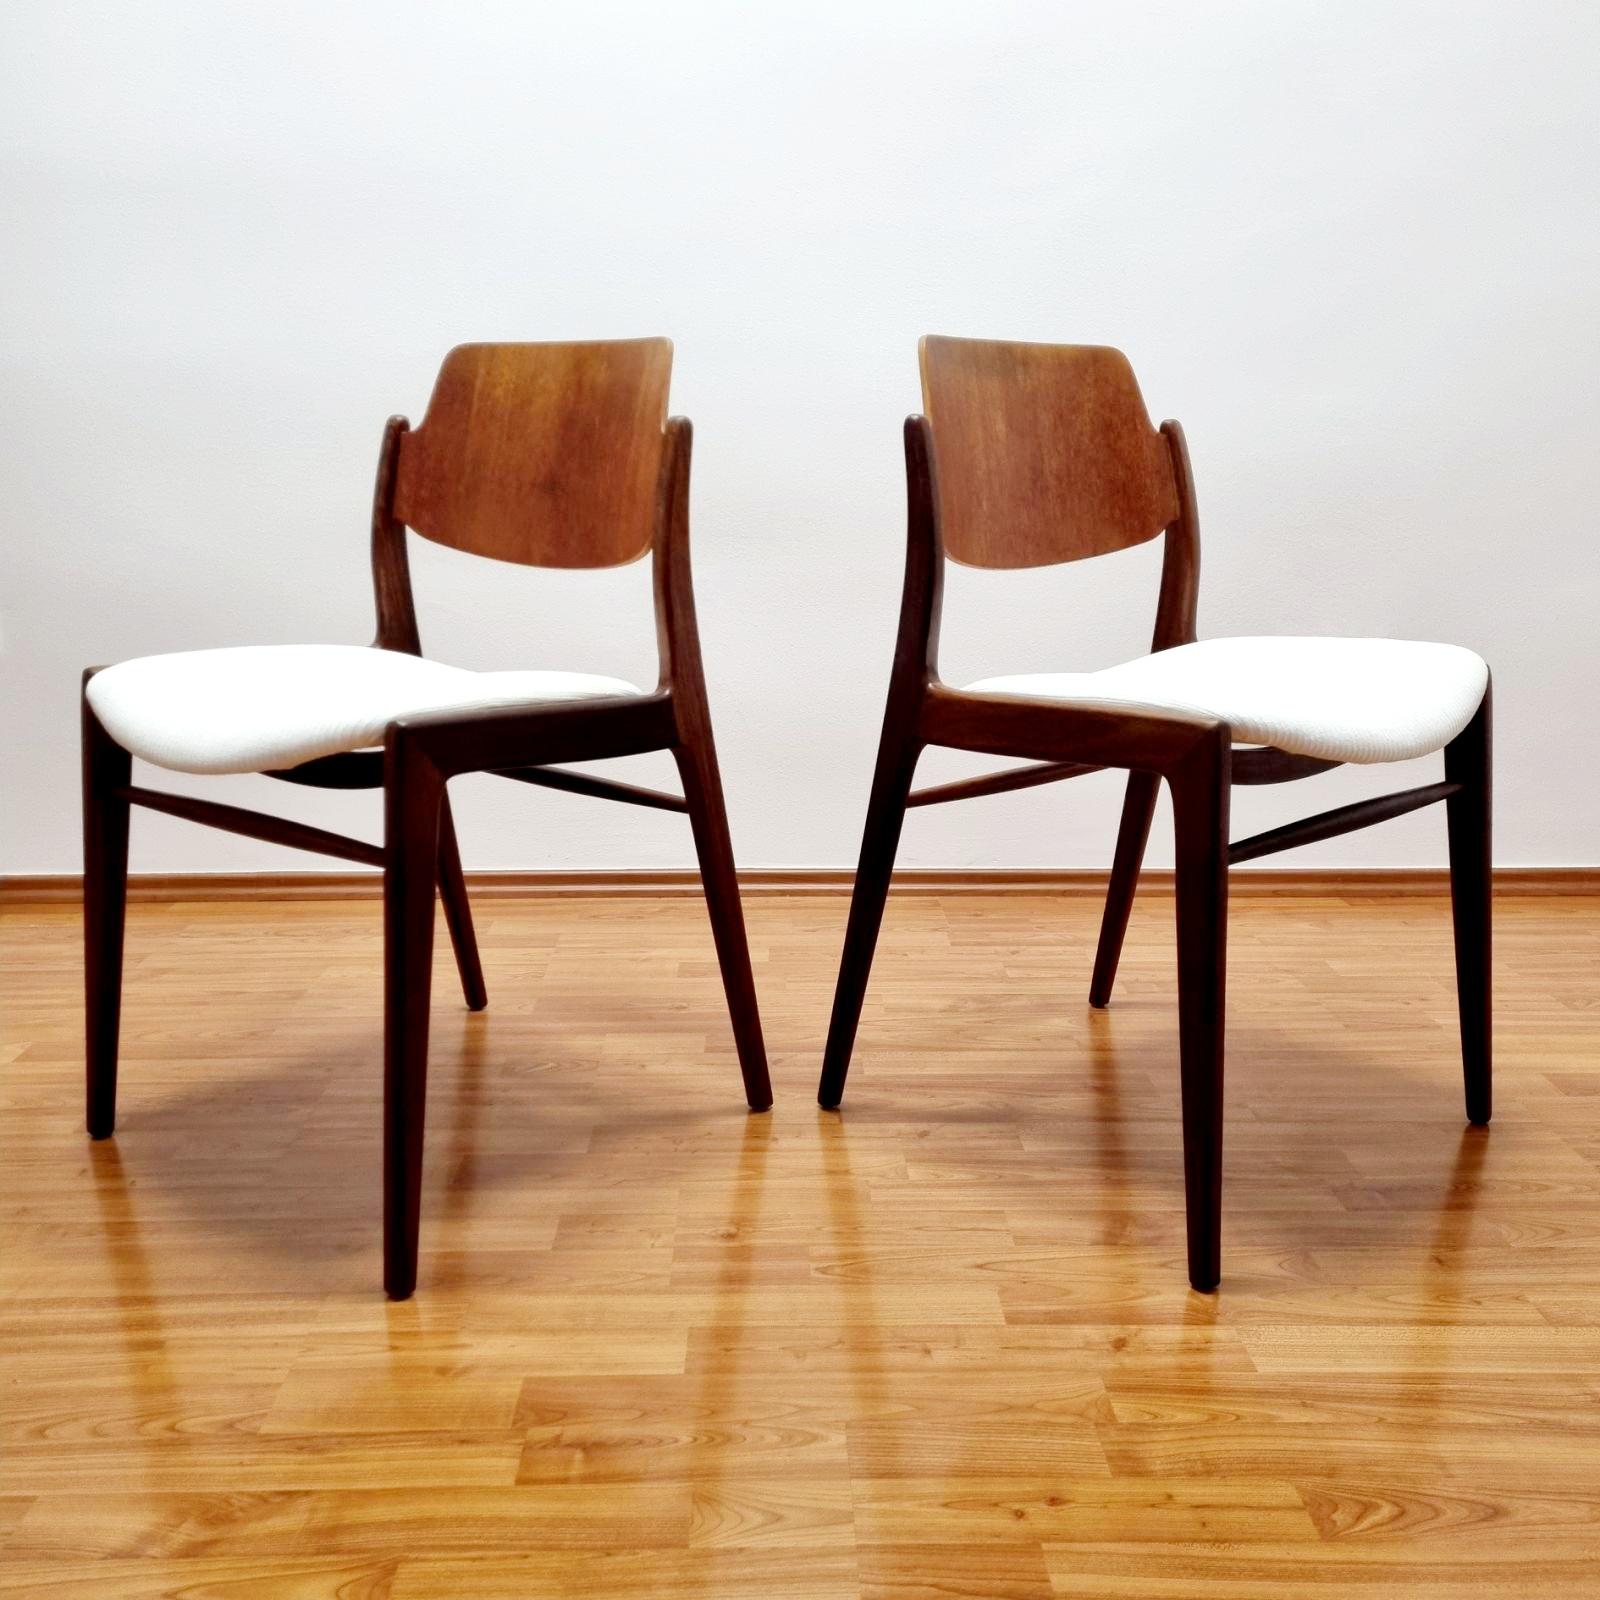 Dining Chairs By Hartmut Lohmeyer For Wilkhahn, Germany 60s For Sale 5